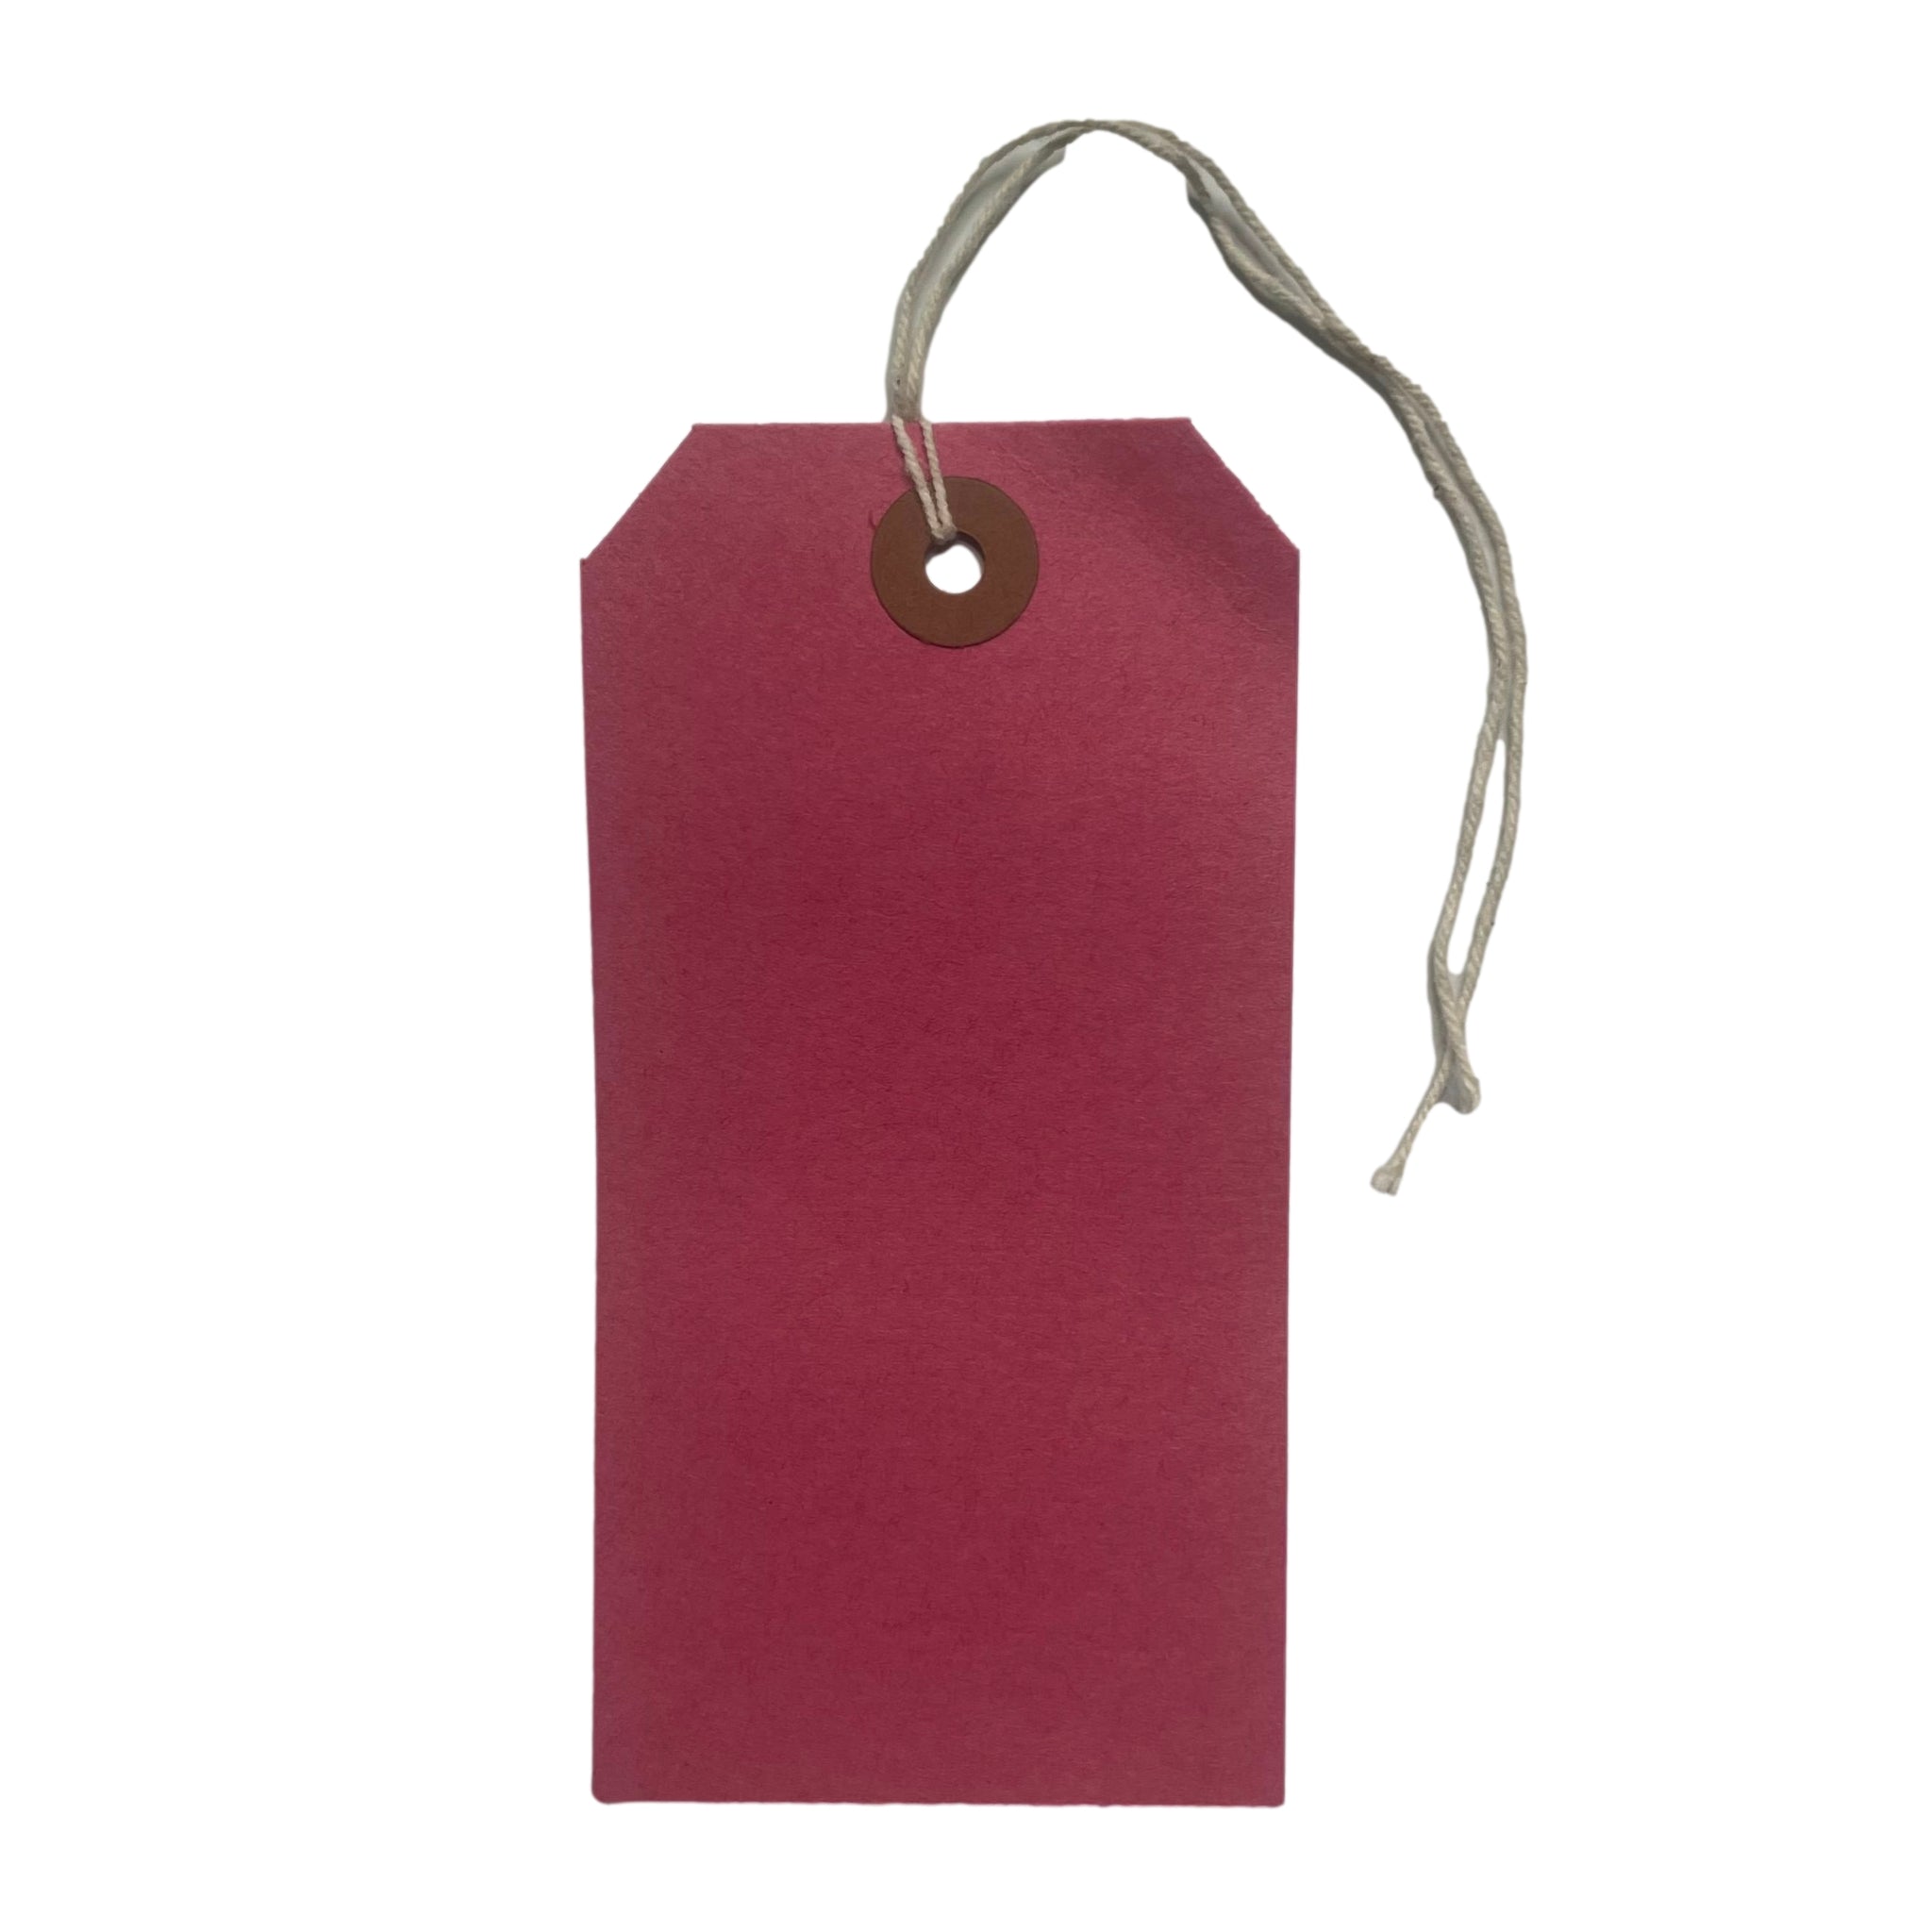 Box of 1000 120 x 60mm Red Luggage Tags